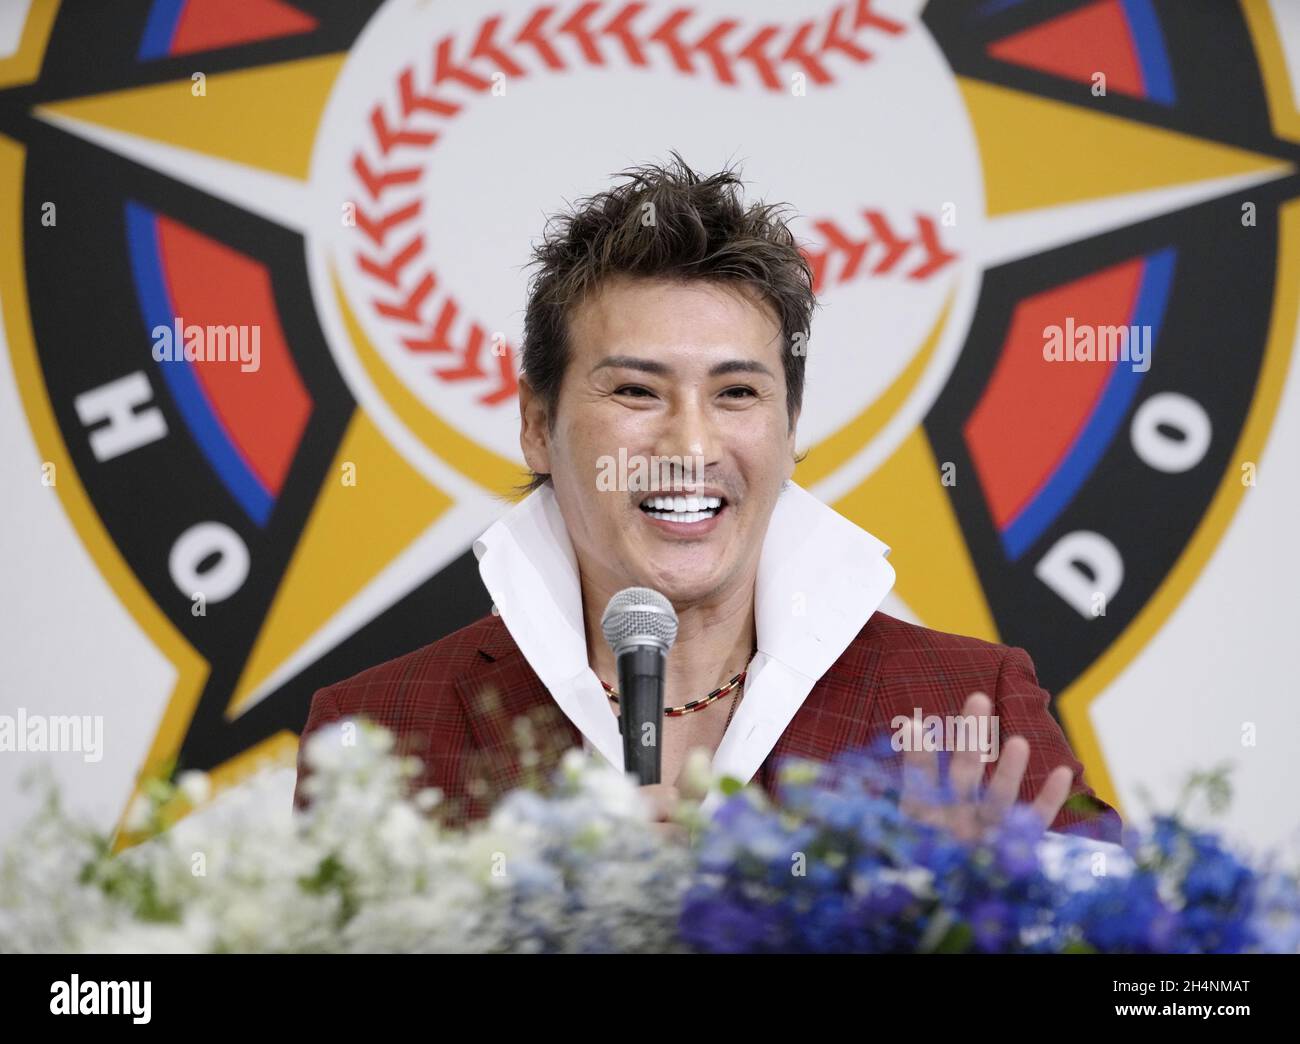 Nippon Ham Fighters manager Tsuyoshi Shinjo unveils his uniform change in a  ceremony after the final home game of the season at Sapporo Dome in  Hokkaido, northern Japan, on Sept. 28, 2022.